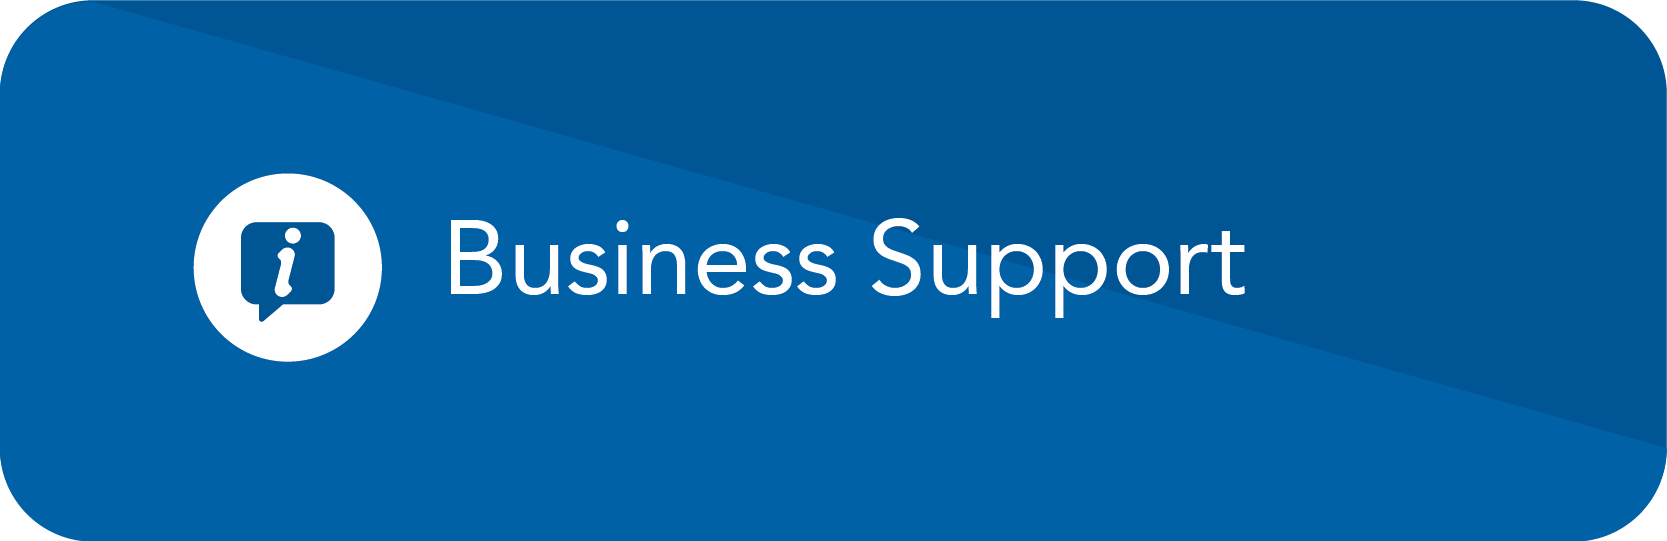 business support button